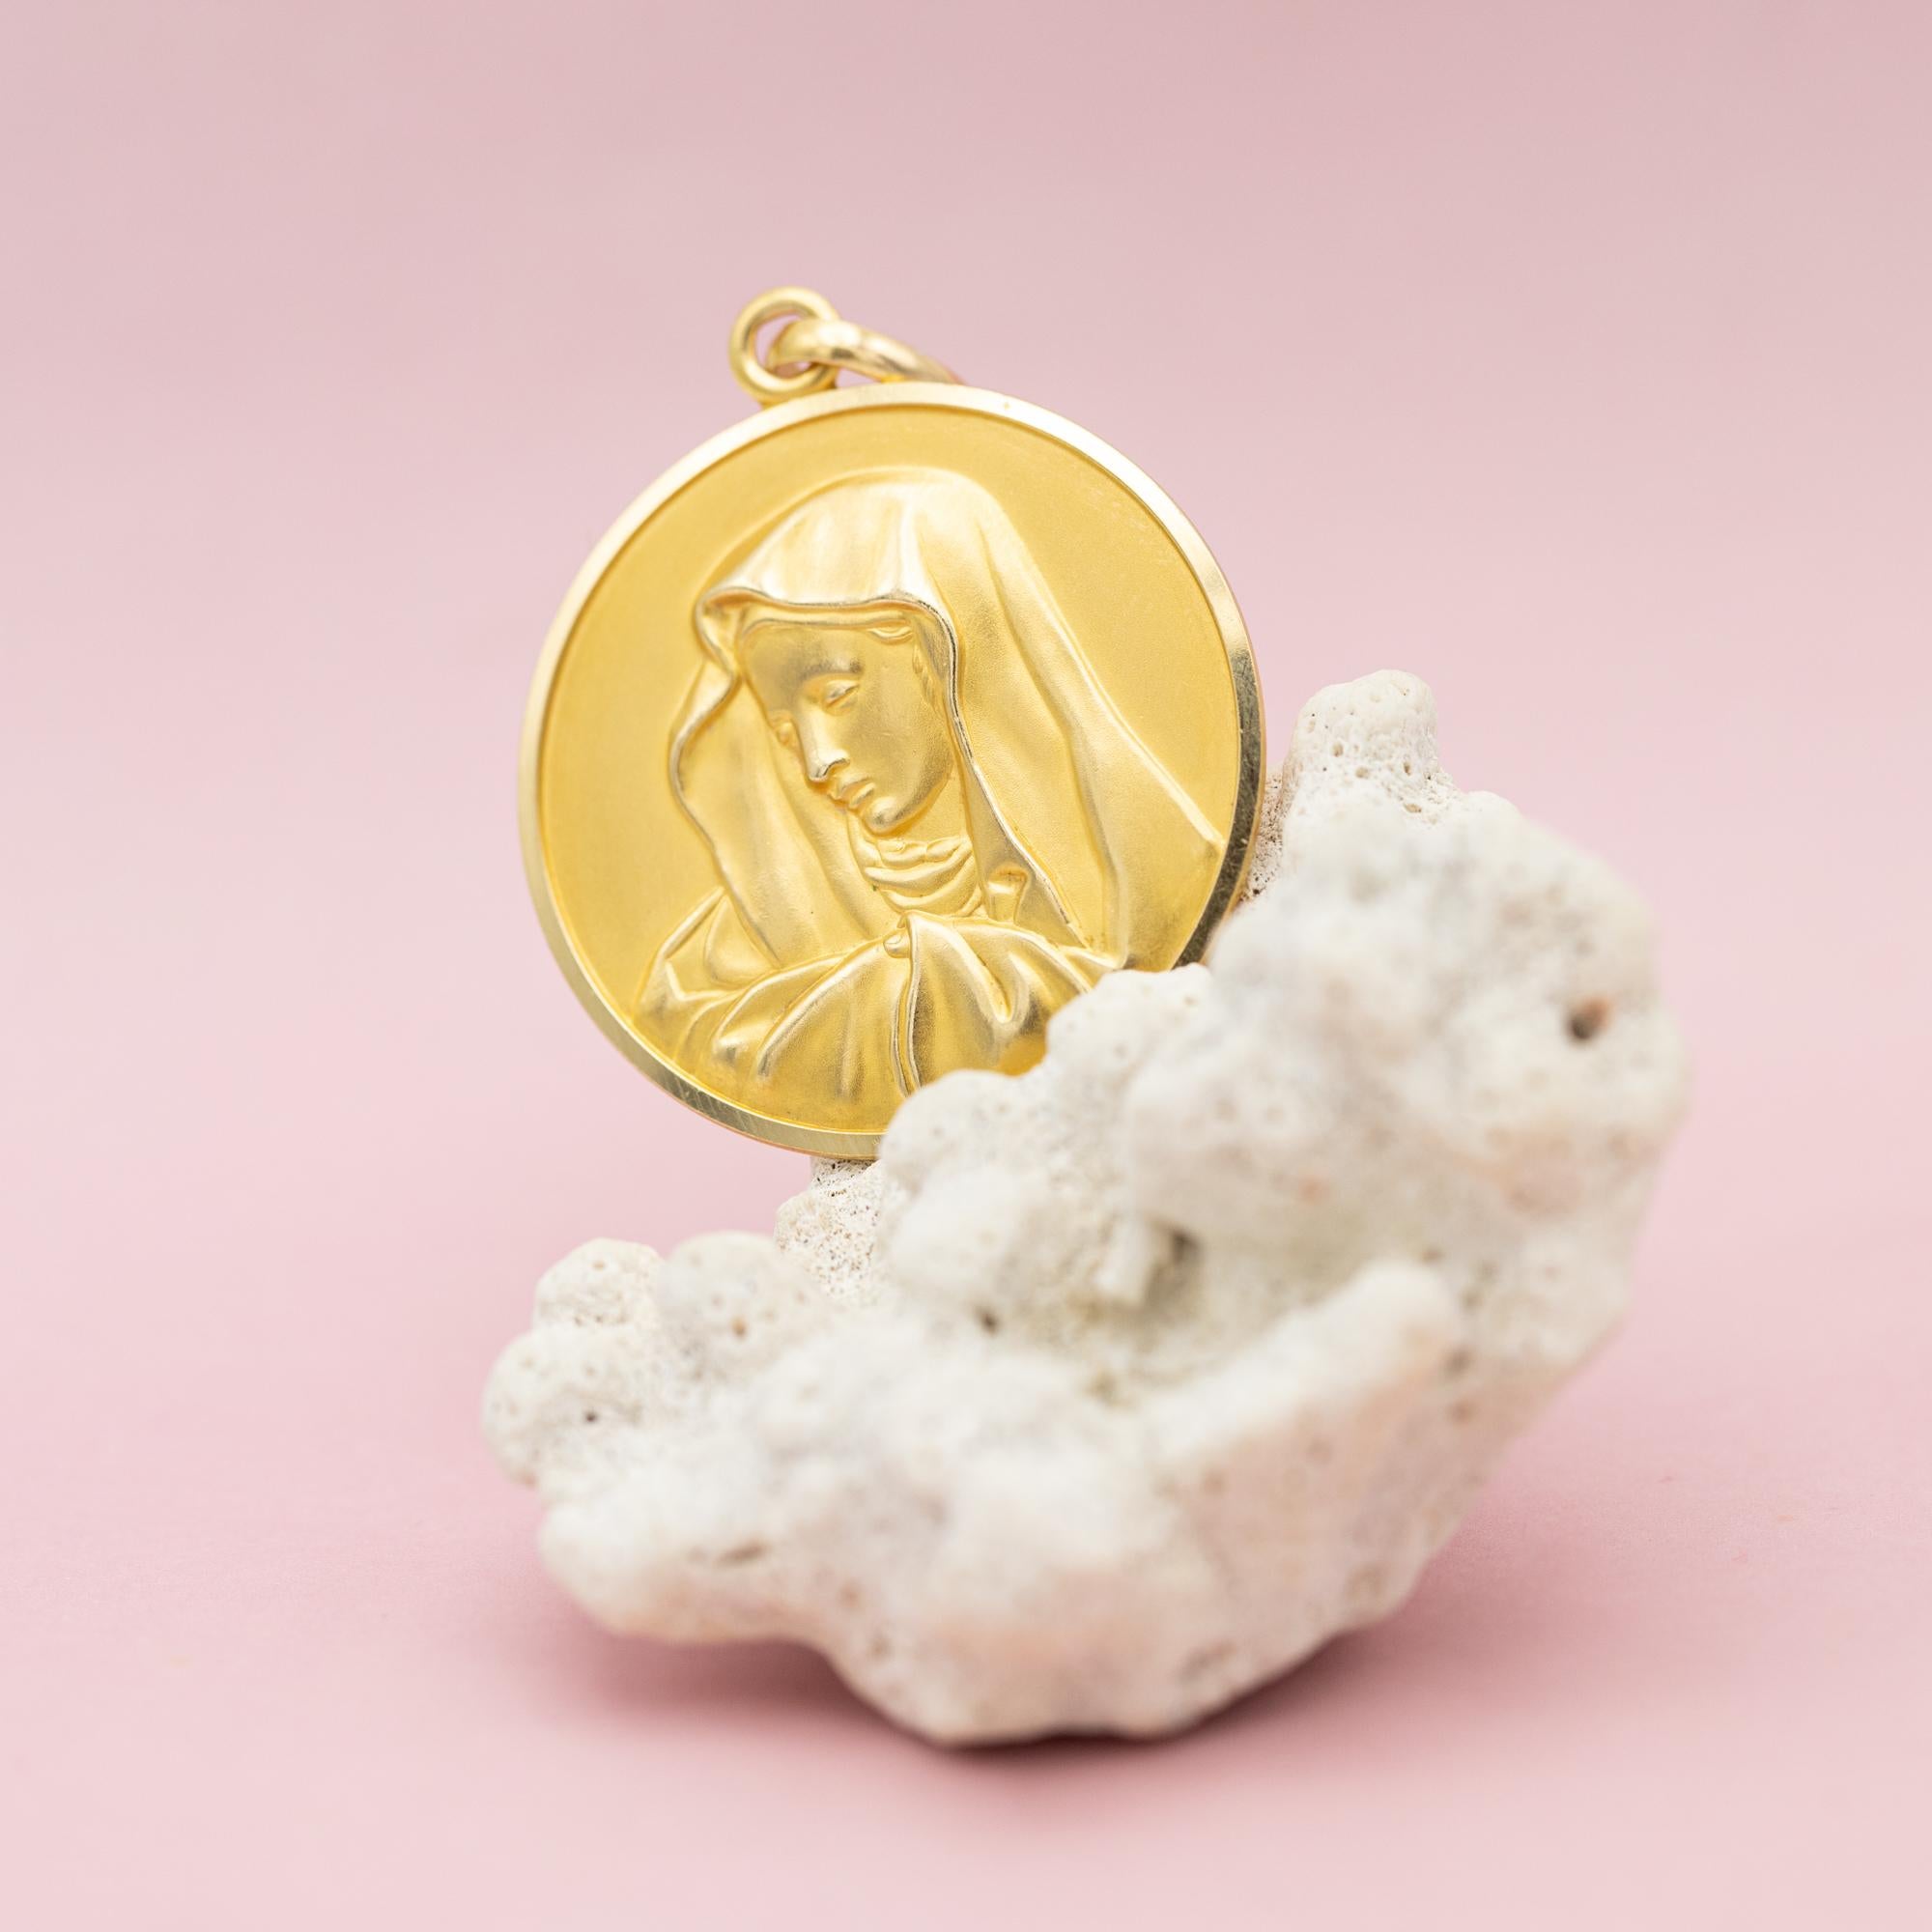 For sale is this XL Estate mother Mary charm. This royal charm depicts a lovely virgin Mary. A raised bust of the Veiled Virgin Mary in a satin finish steals the show in front of the patterned gold base. This Christian medallion is crafted in 18 ct